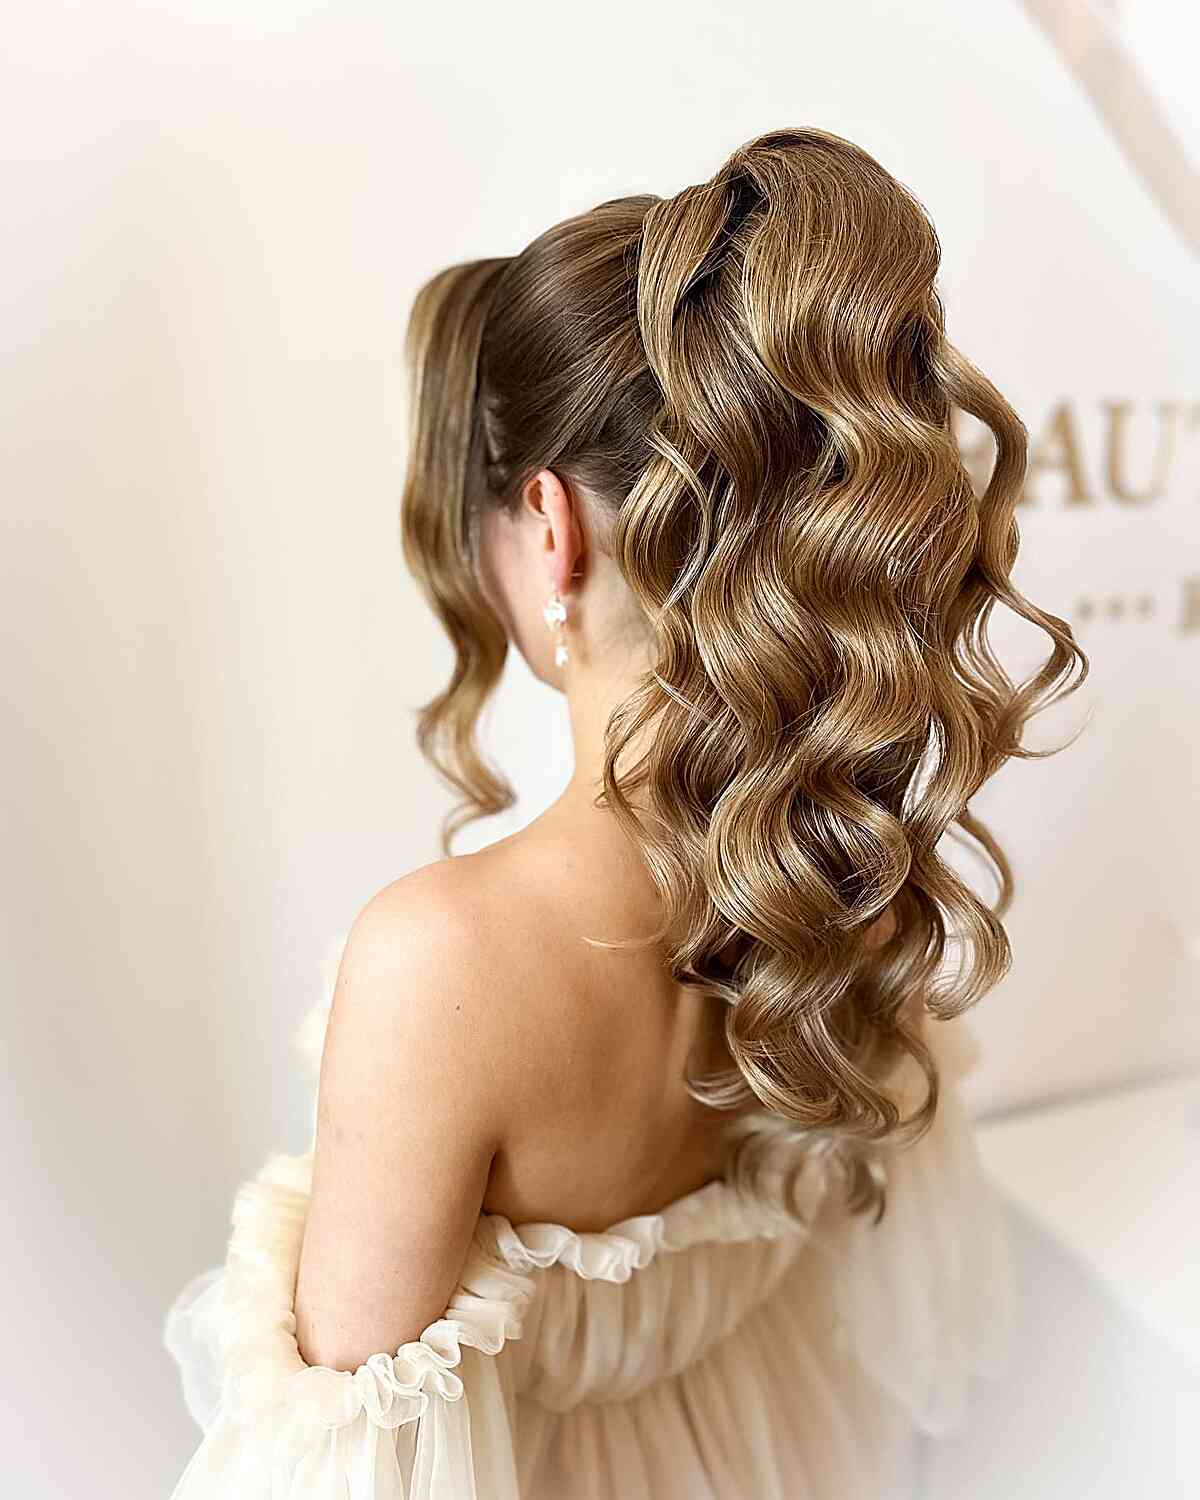 High Pony with Voluminous Curly Waves